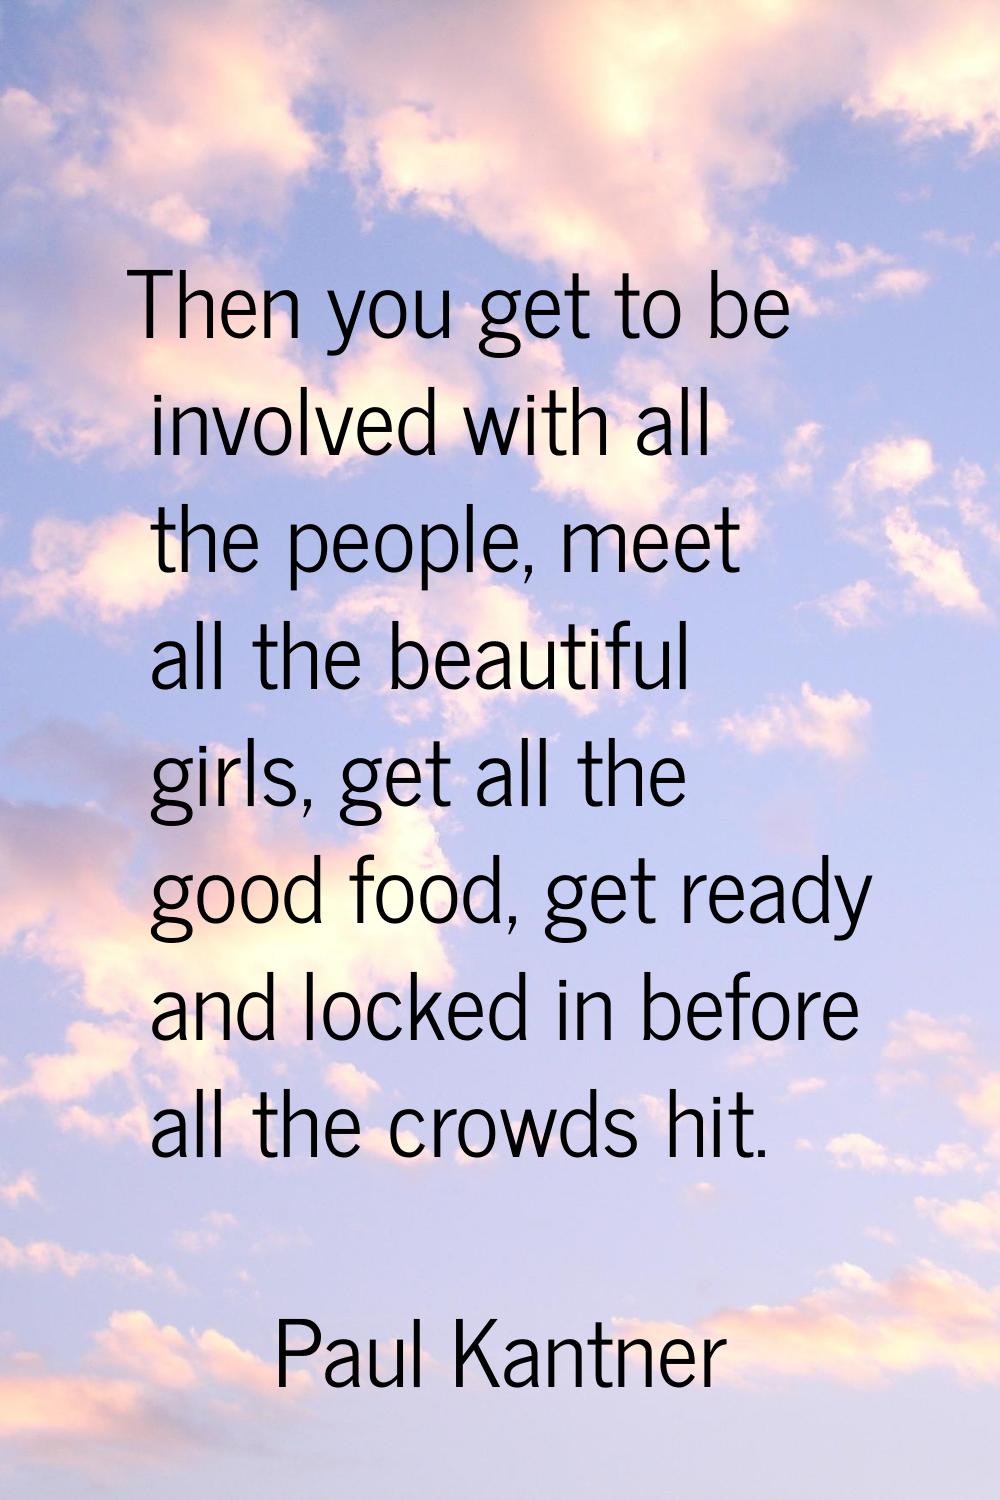 Then you get to be involved with all the people, meet all the beautiful girls, get all the good foo